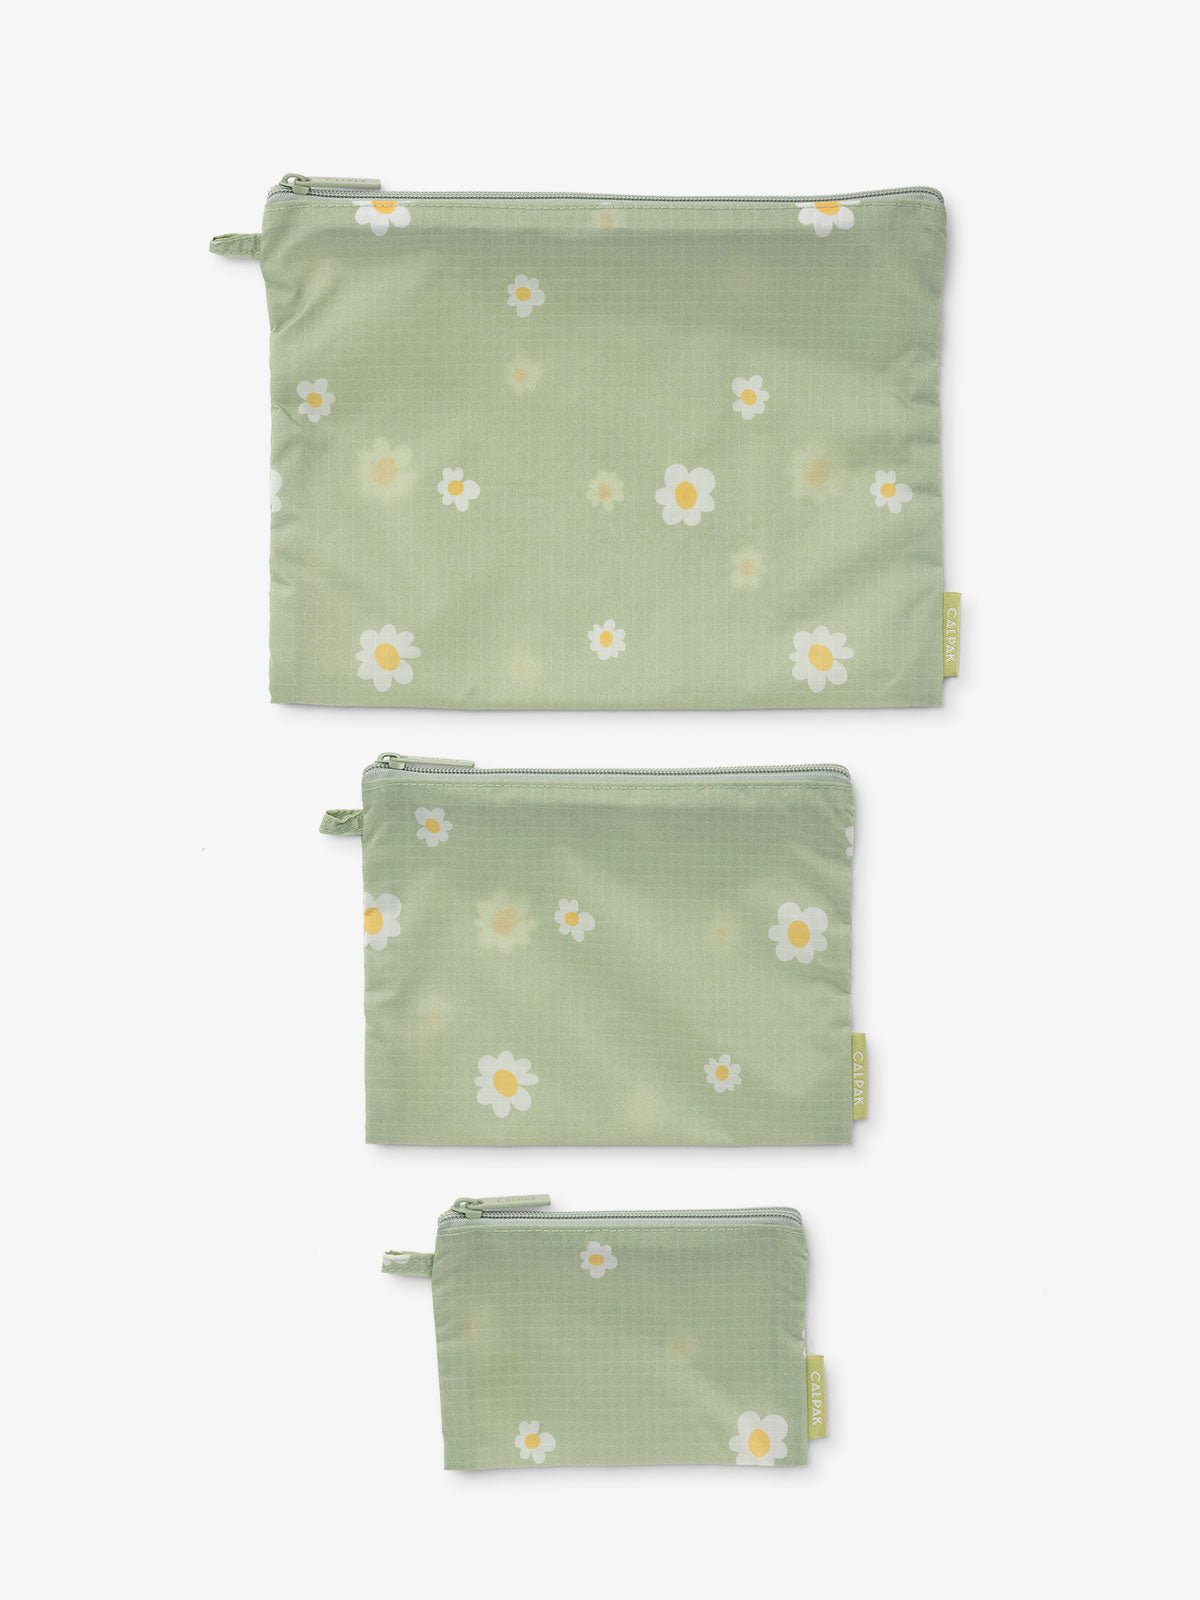 Set of pouches for storage and travel in daisy